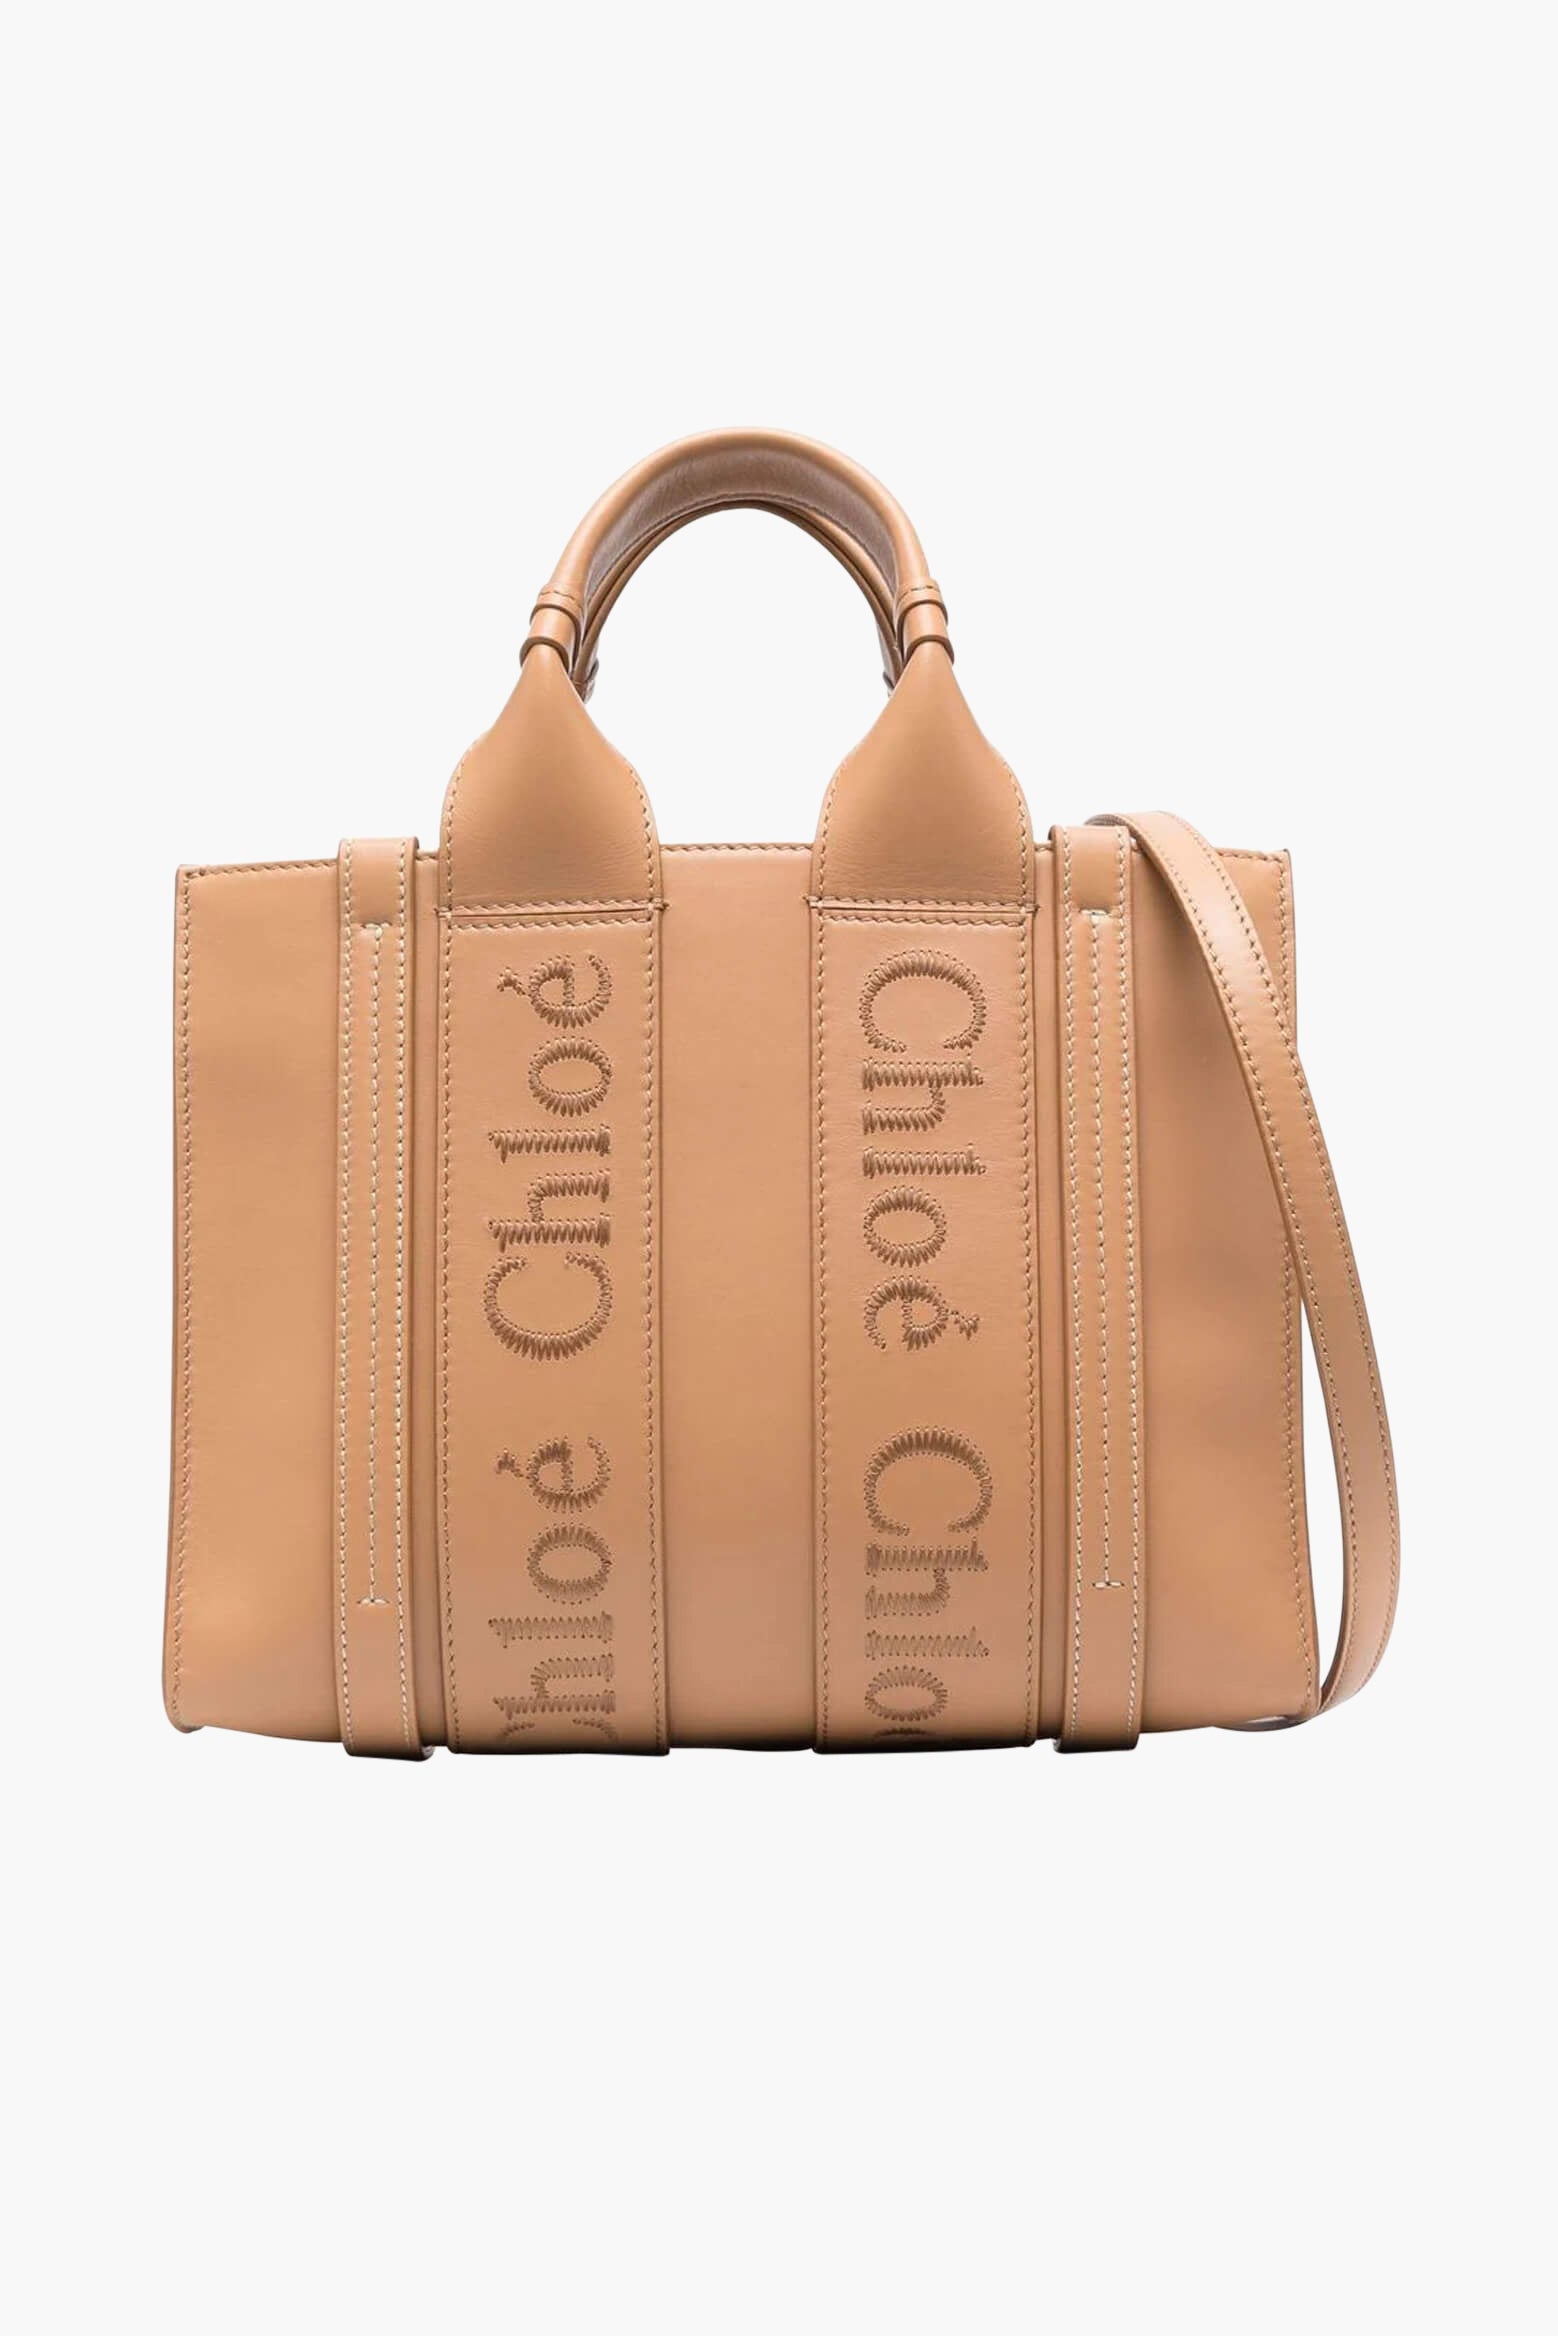 Chloe Bags: The ultimate guide to the brand, best sellers & save 15% -  Fashion For Lunch